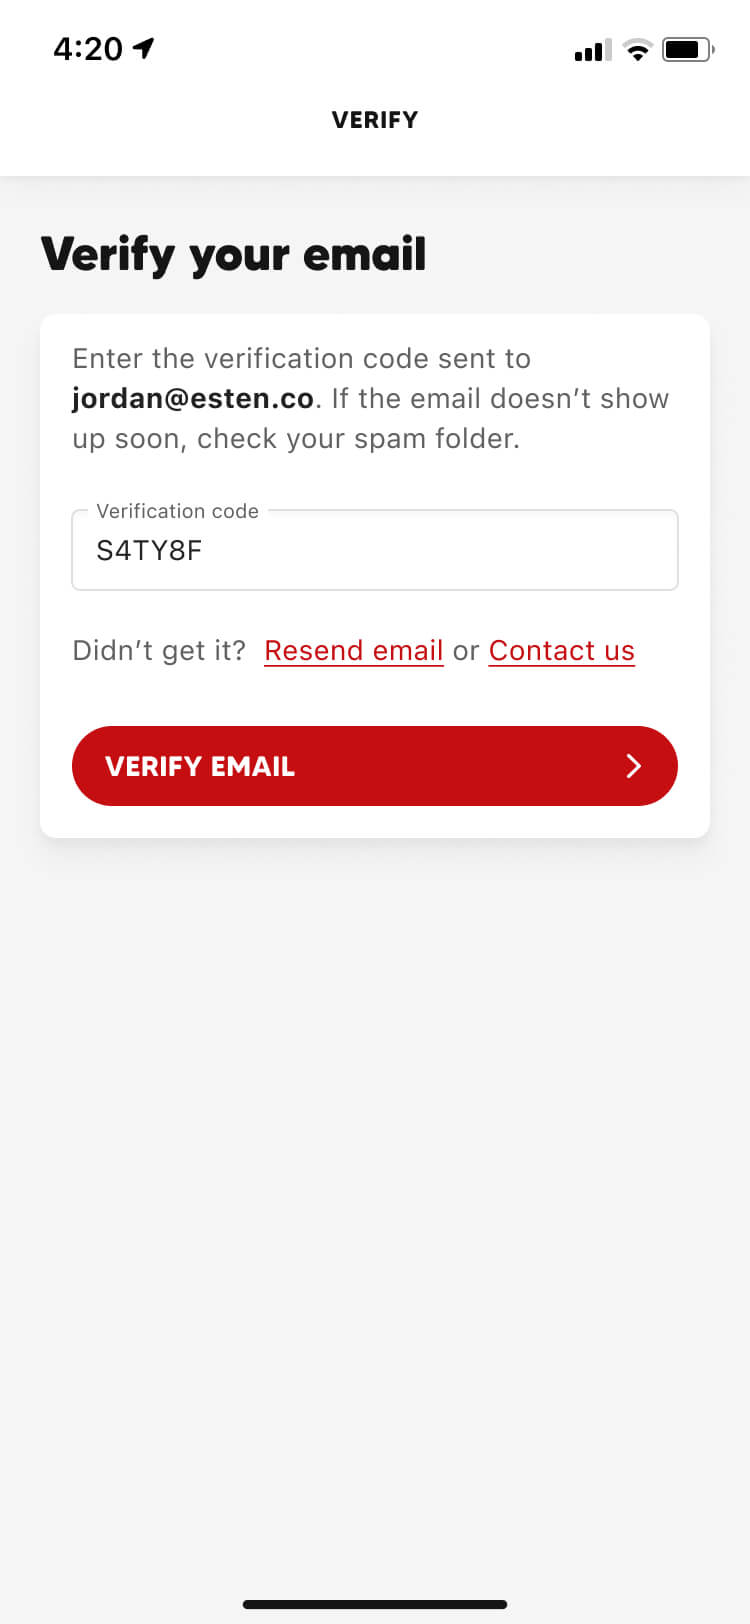 Verify your email screenshot of the Collect mobile app